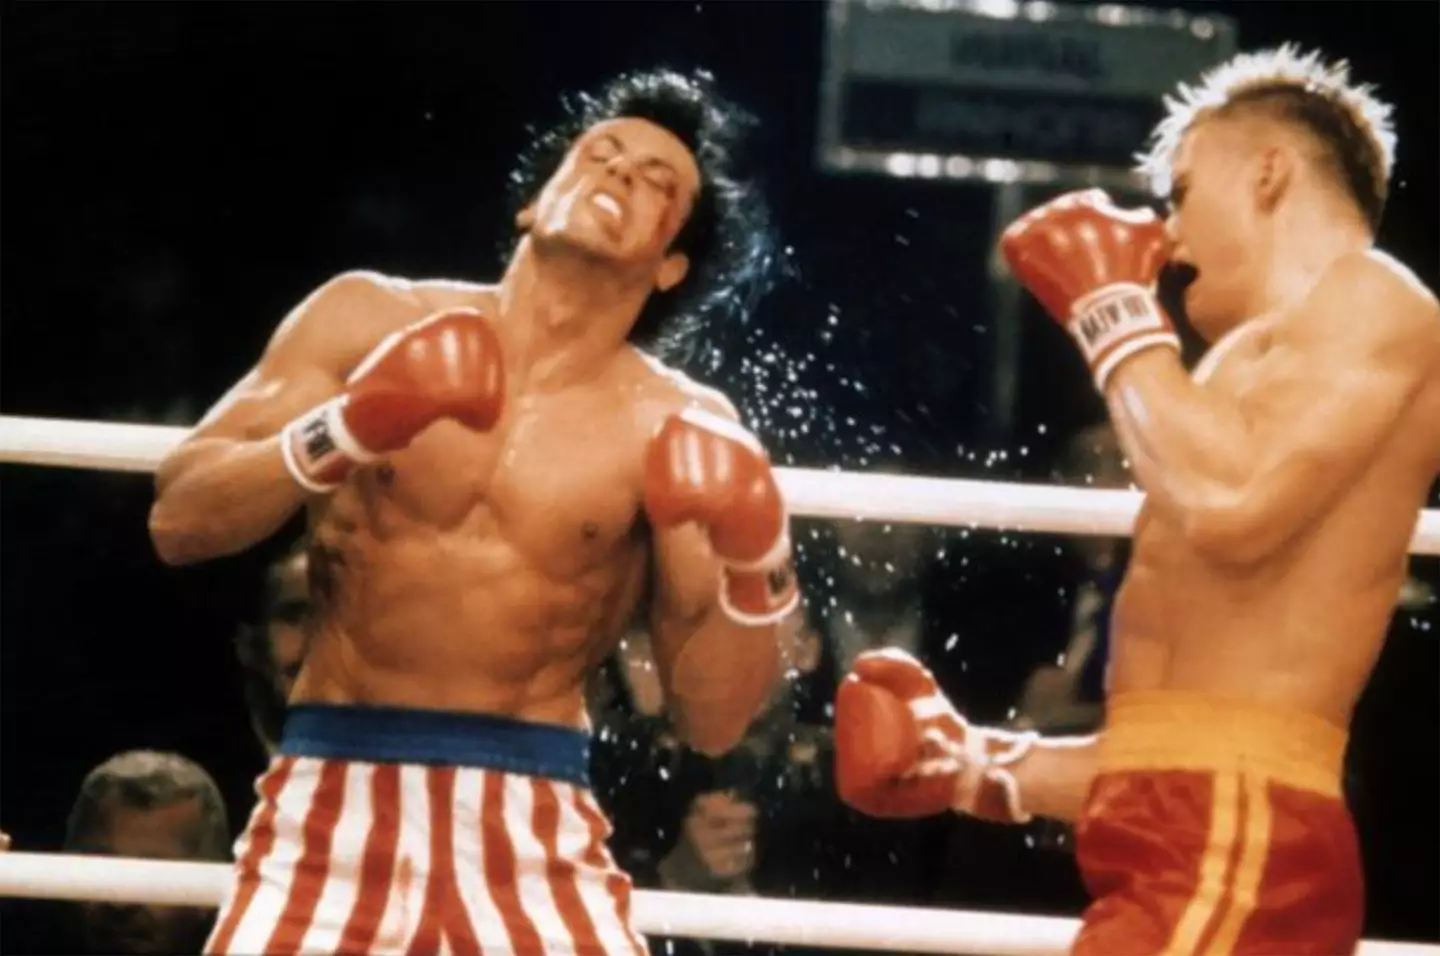 Dolph Lundgren put Sylvester Stallone took the punches a bit too far for Rocky IV.